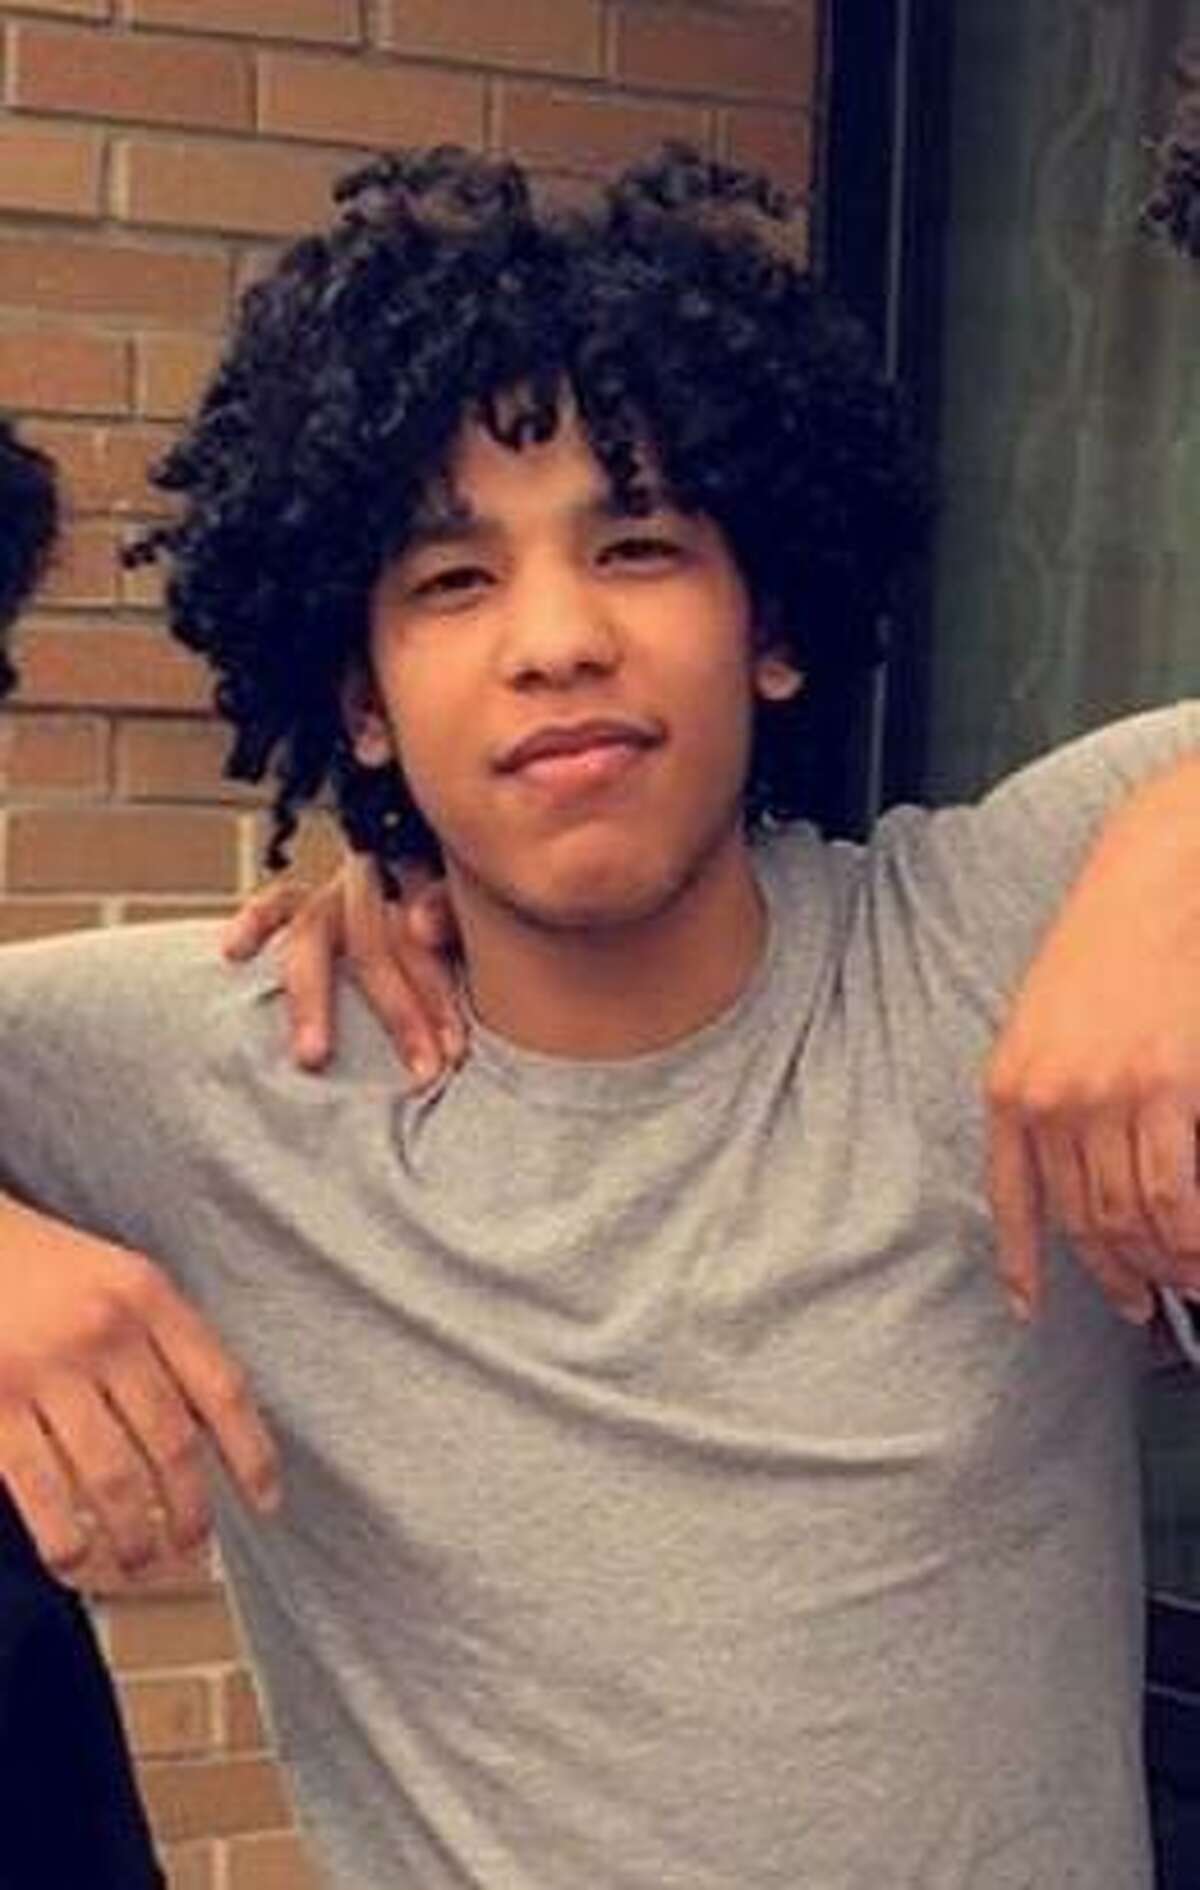 Willy Placencia, 21, died after being stabbed multiple times at the Danbury City Center Skate Park on March 18, 2020.